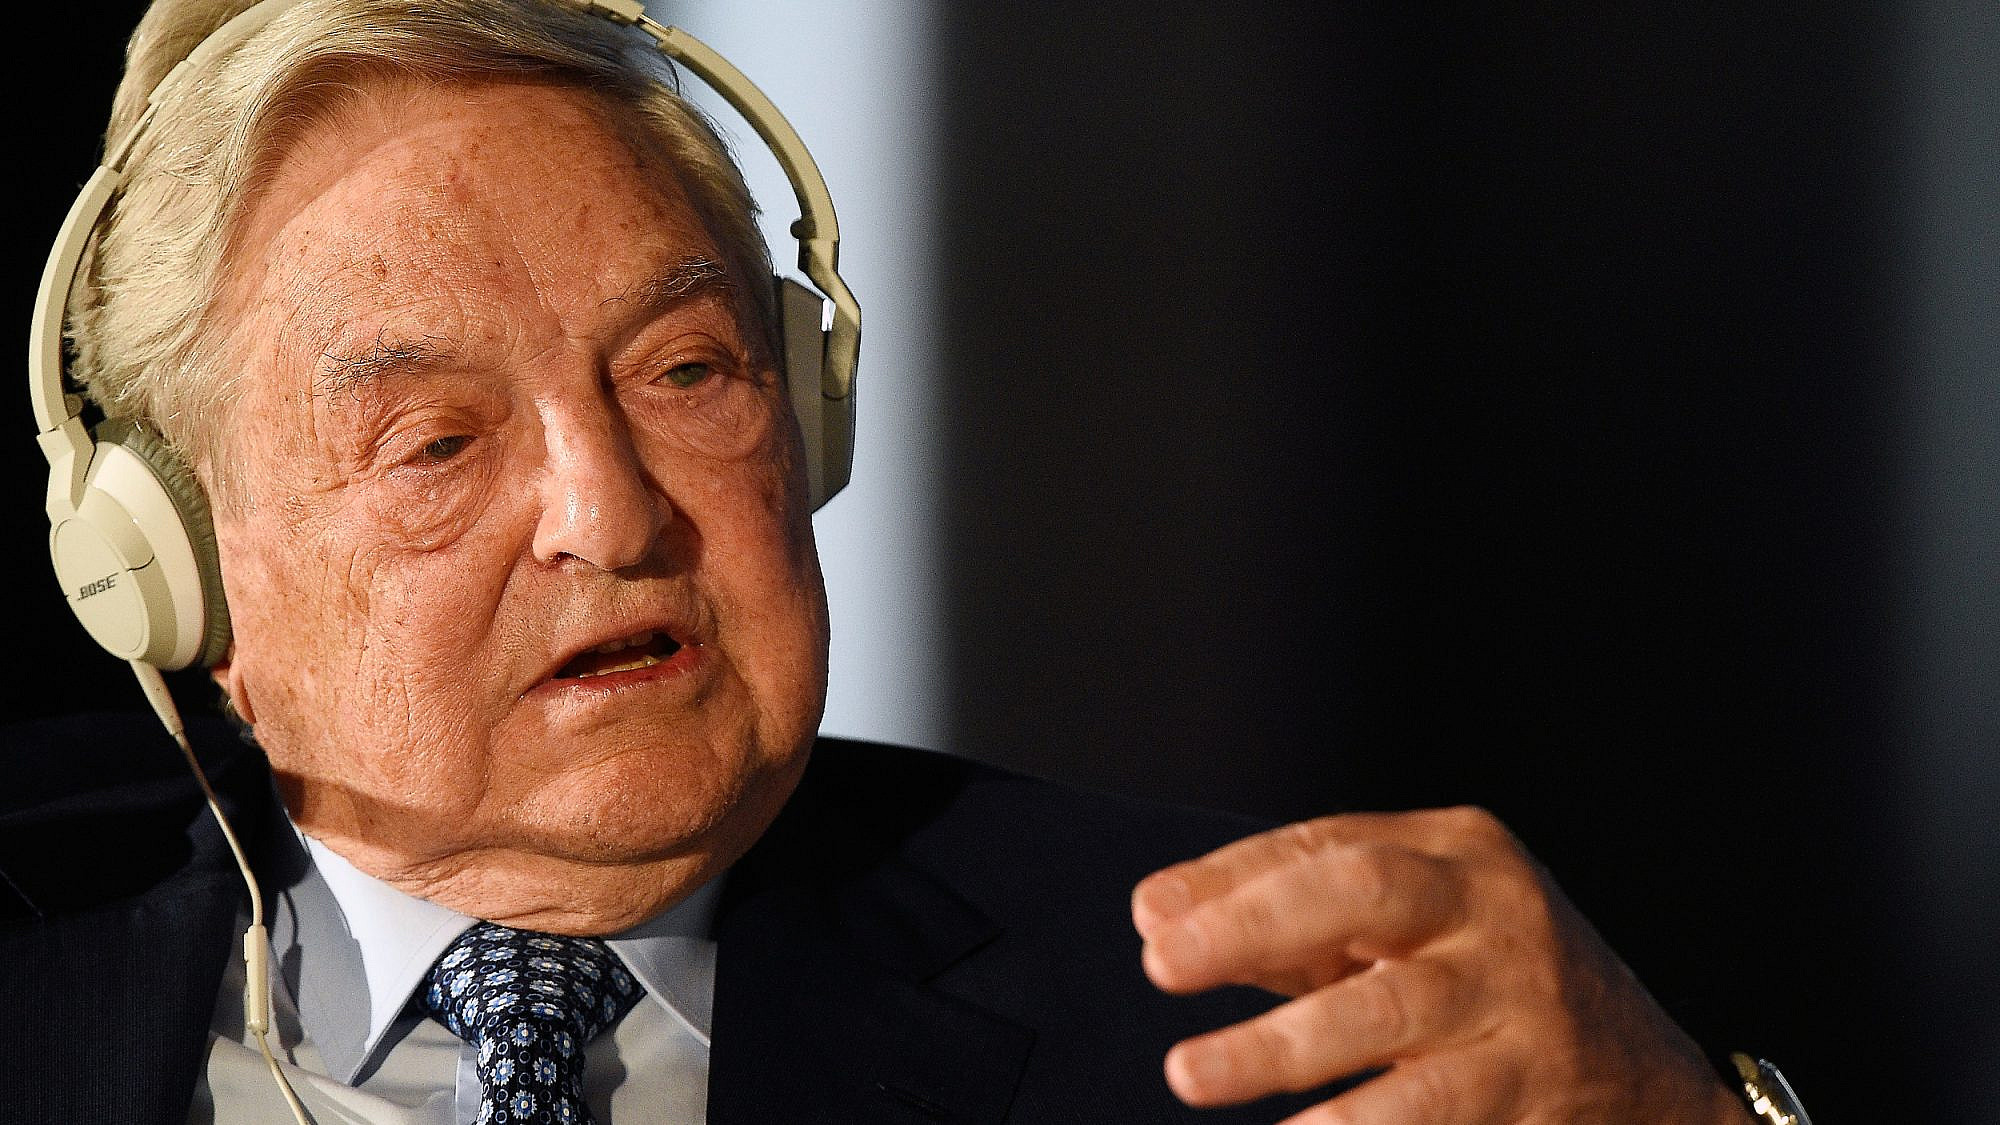 George Soros, the Hungarian-born American billionaire, investor and philanthropist, speaks during a political and financial meeting in Italy in 2014. Credit: Giacomo Morinini/Shutterstock.